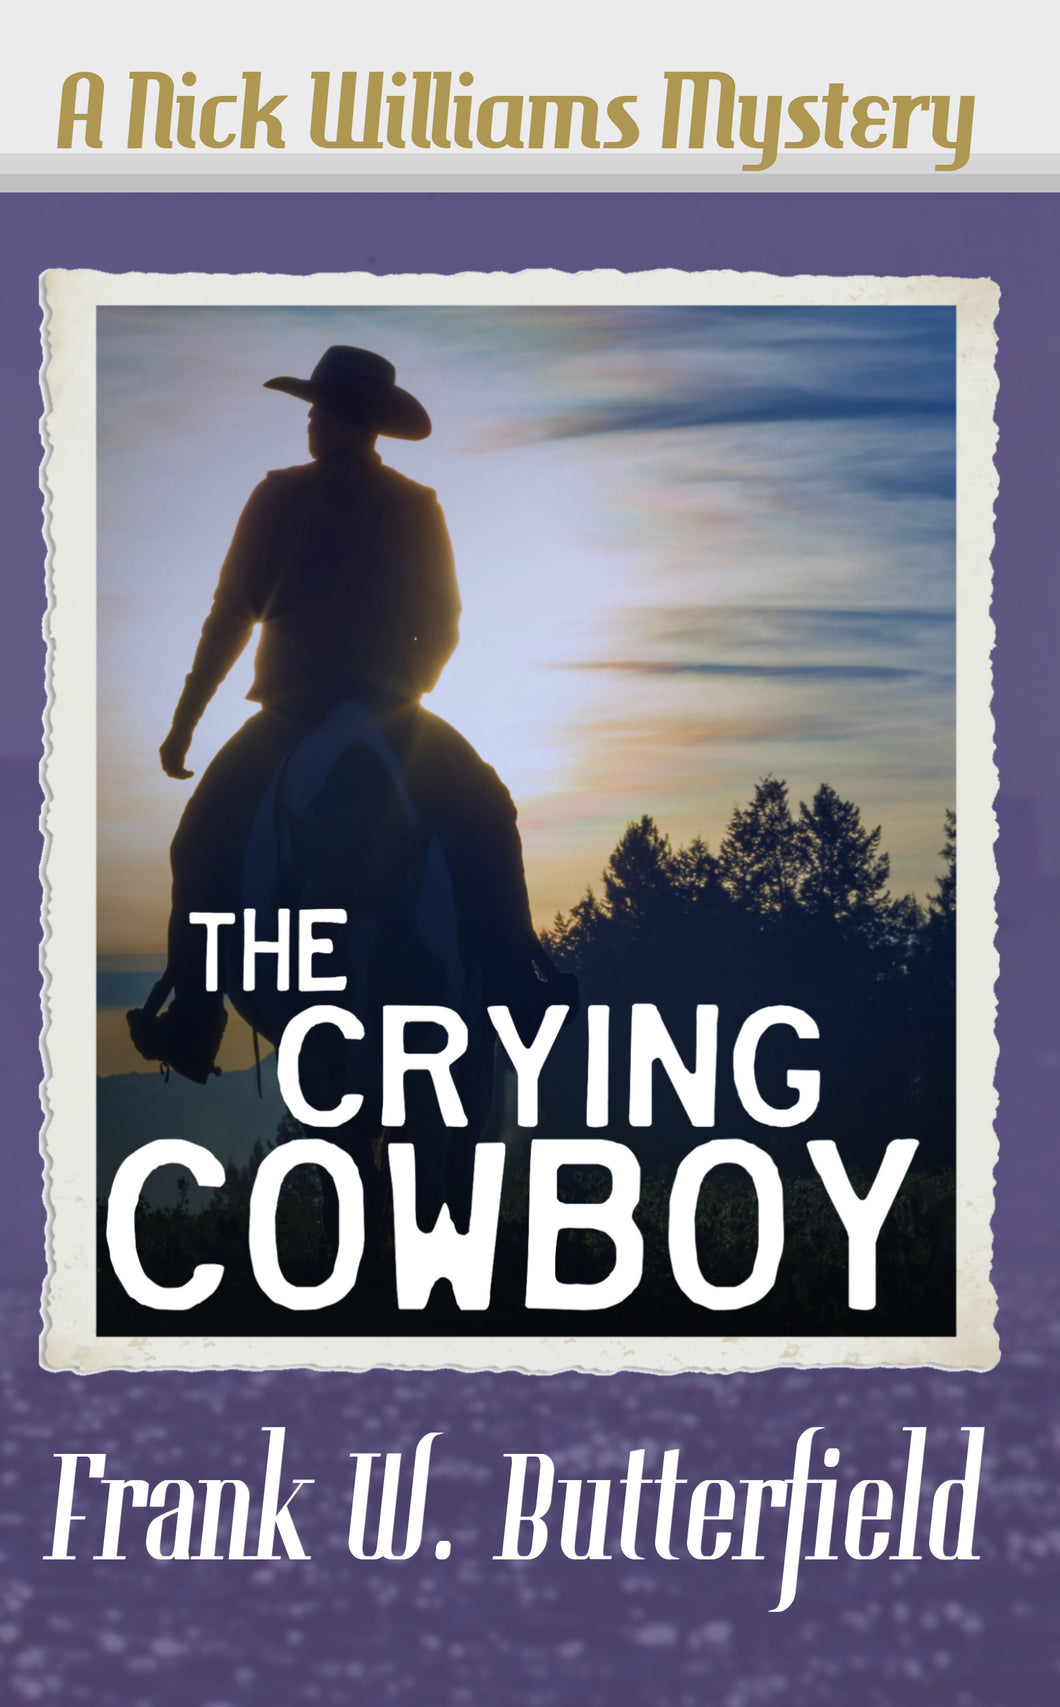 The Crying Cowboy